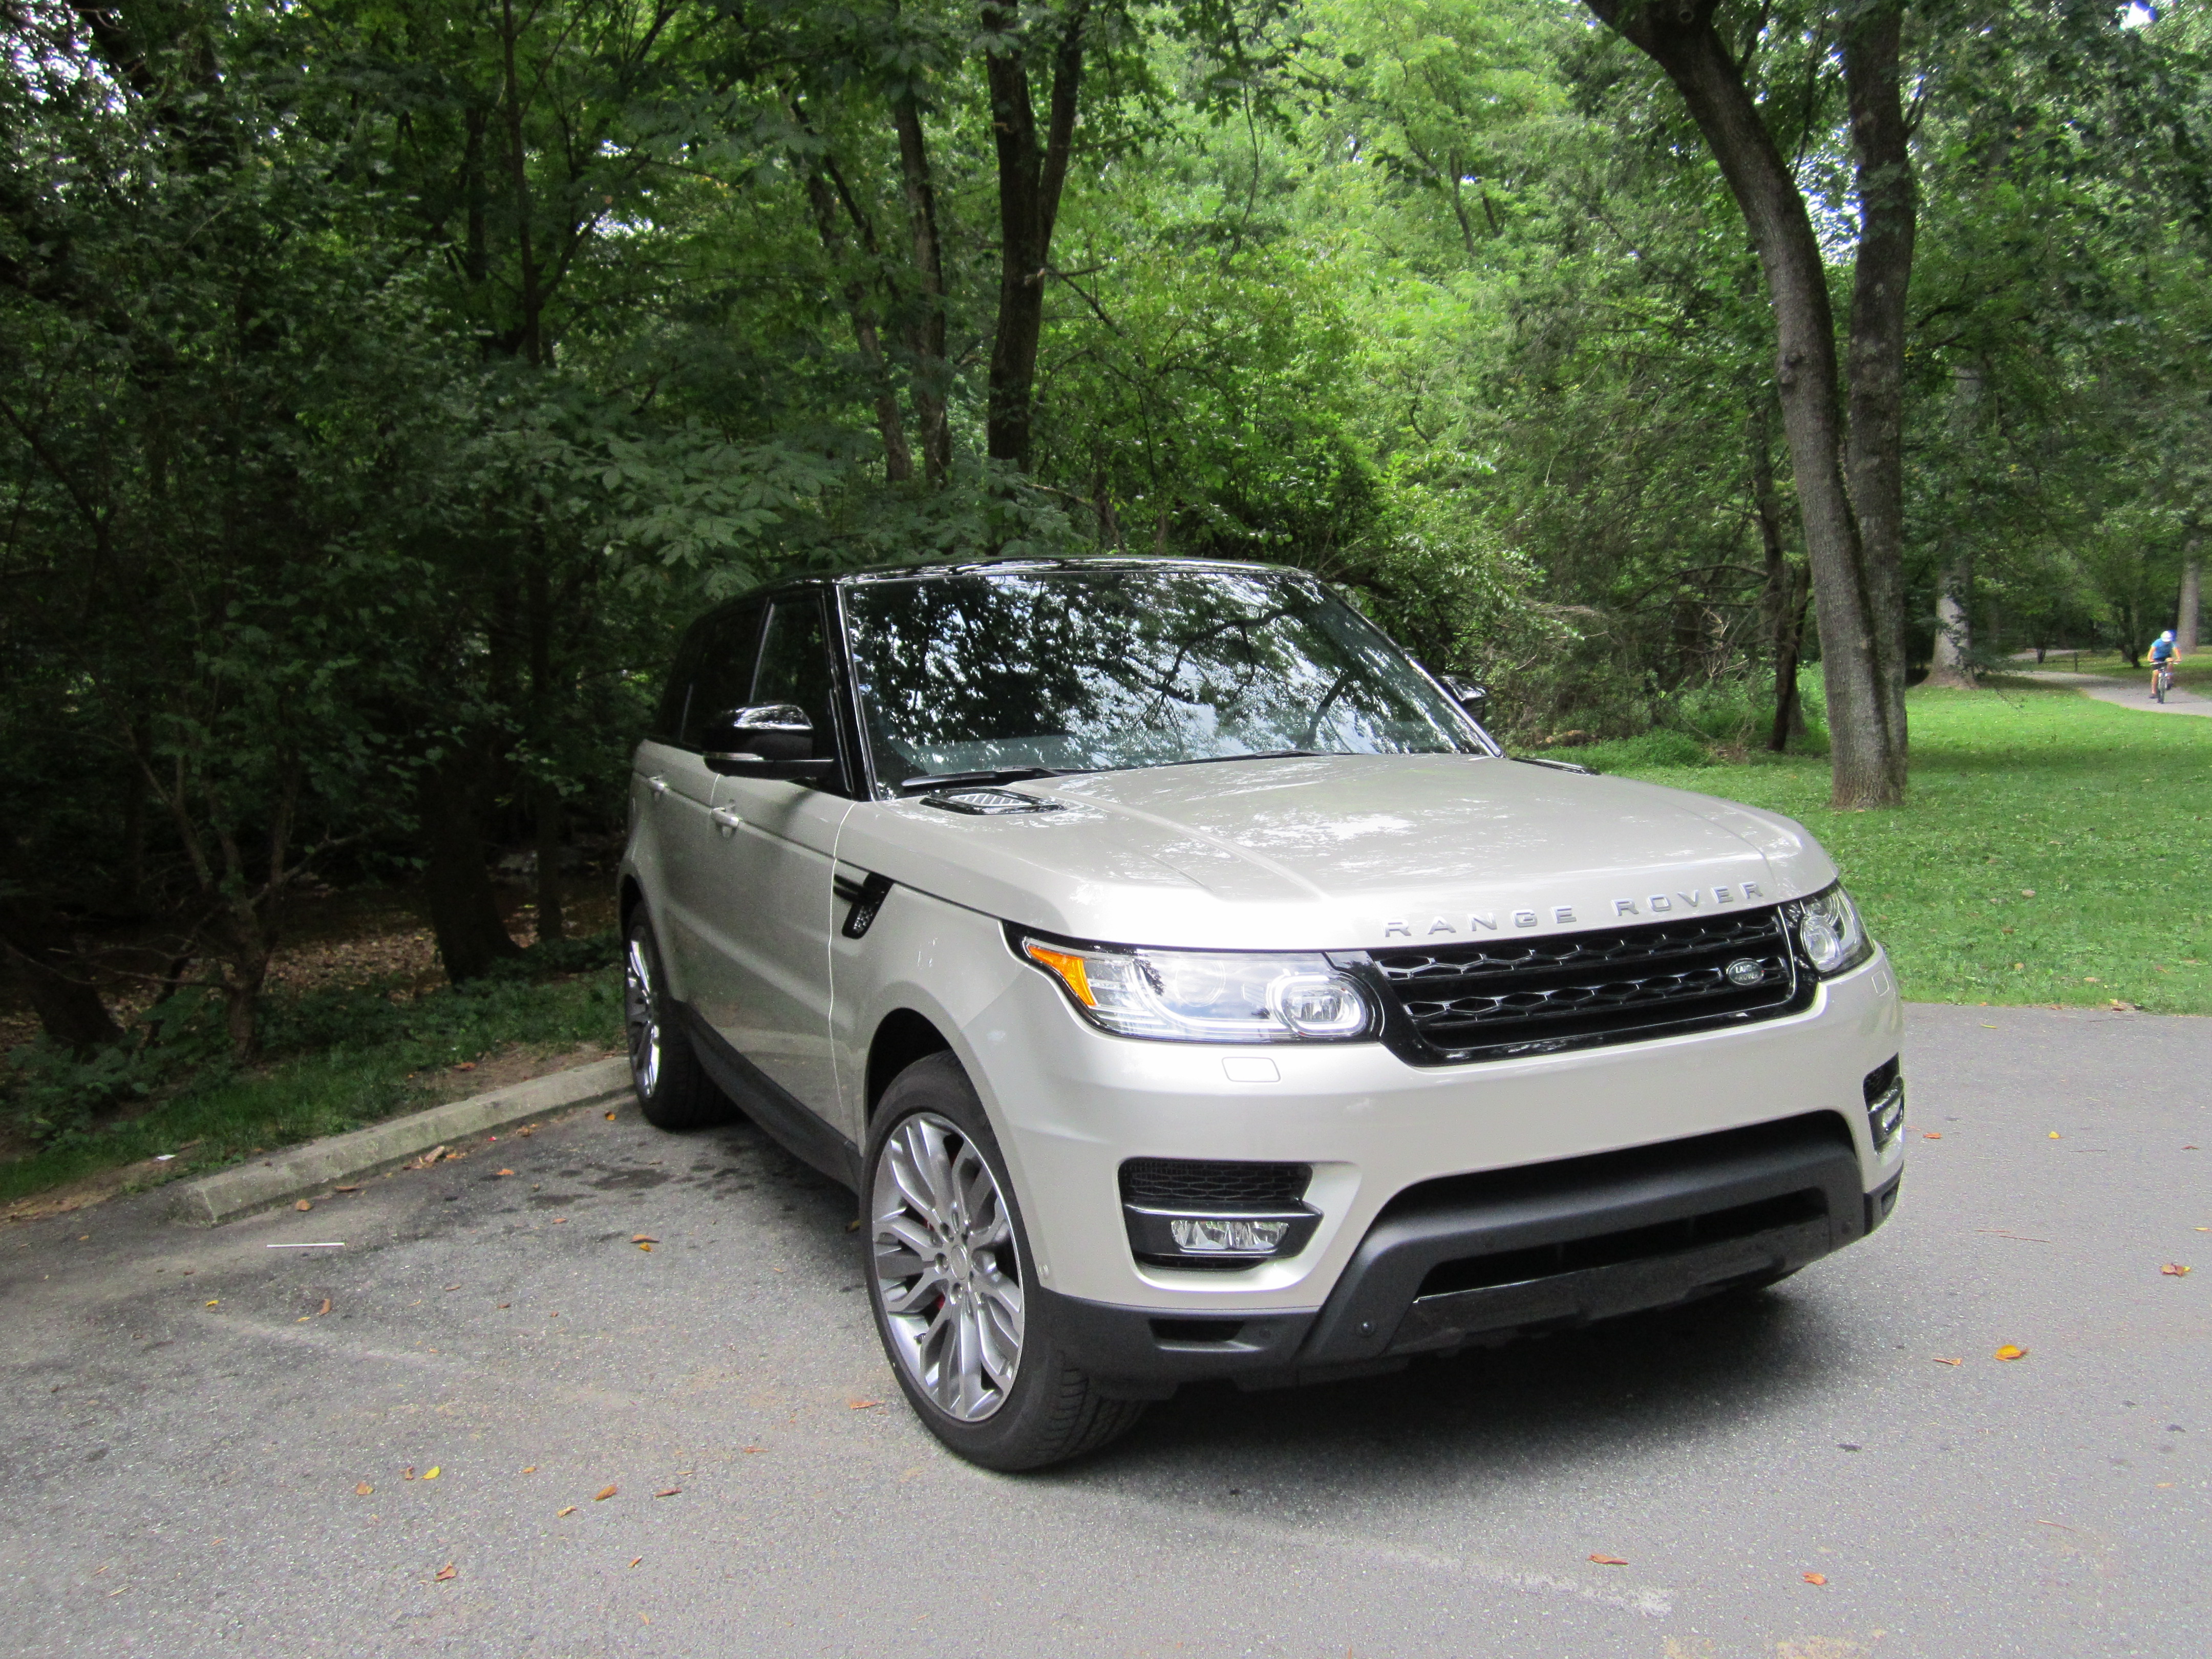 Car Report: Range Rover Sport is redesigned with big improvements